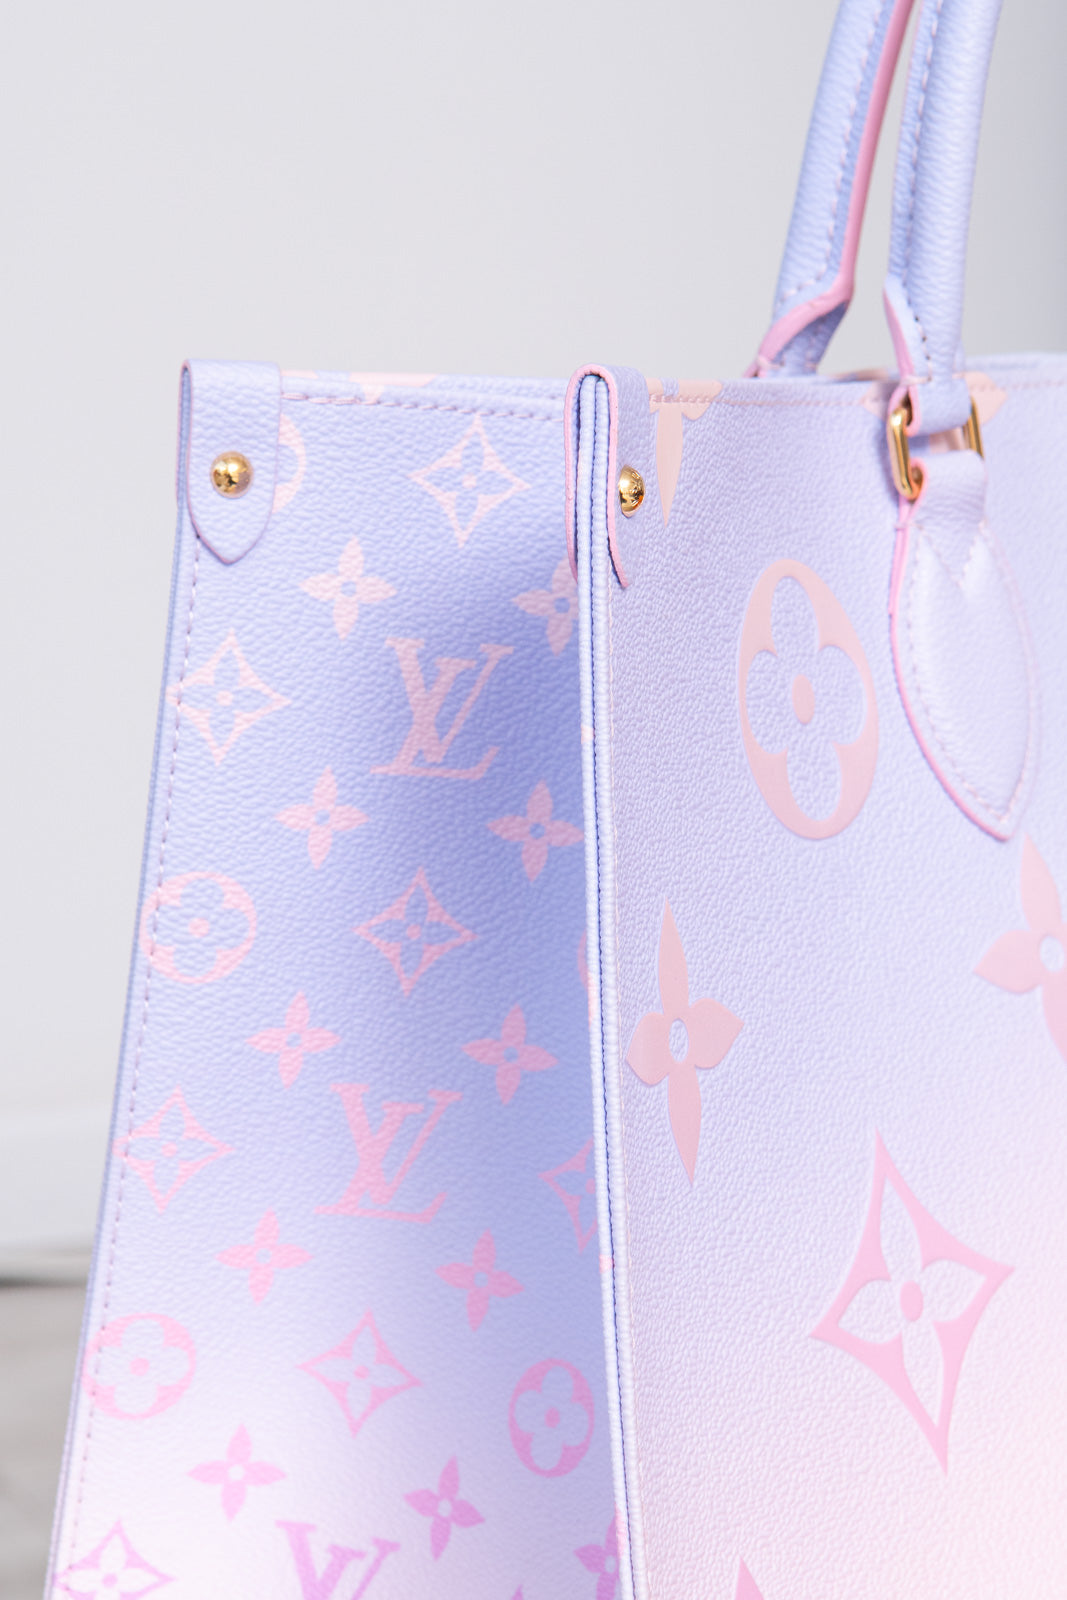 Louis Vuitton Limited Edition On The Go Sunrise Pastel Tote Bag - Image 15 of 15